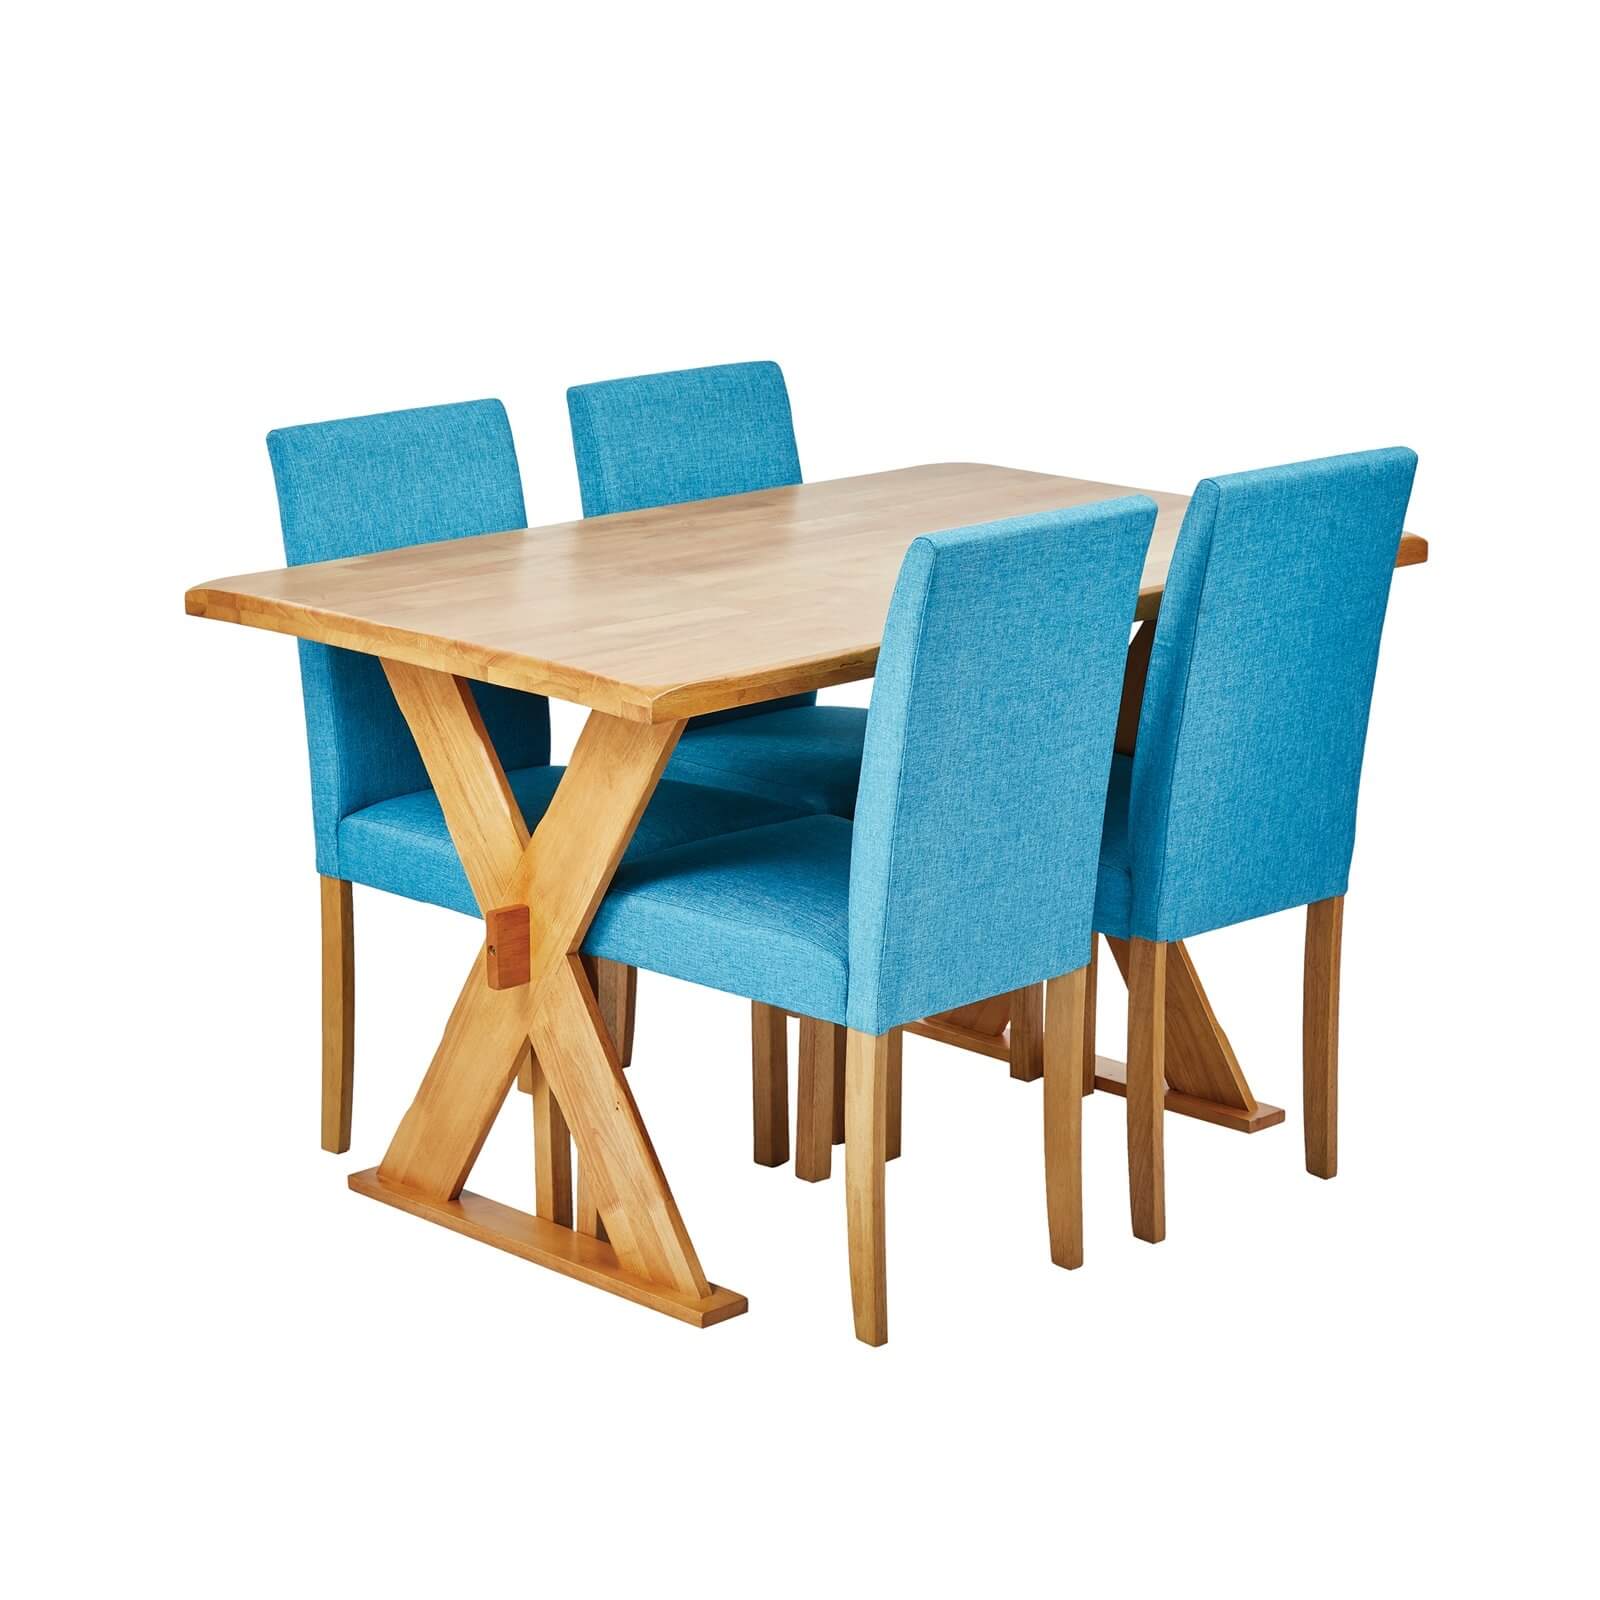 Seville 4 Seater Dining Set - Anna Dining Chairs - Teal